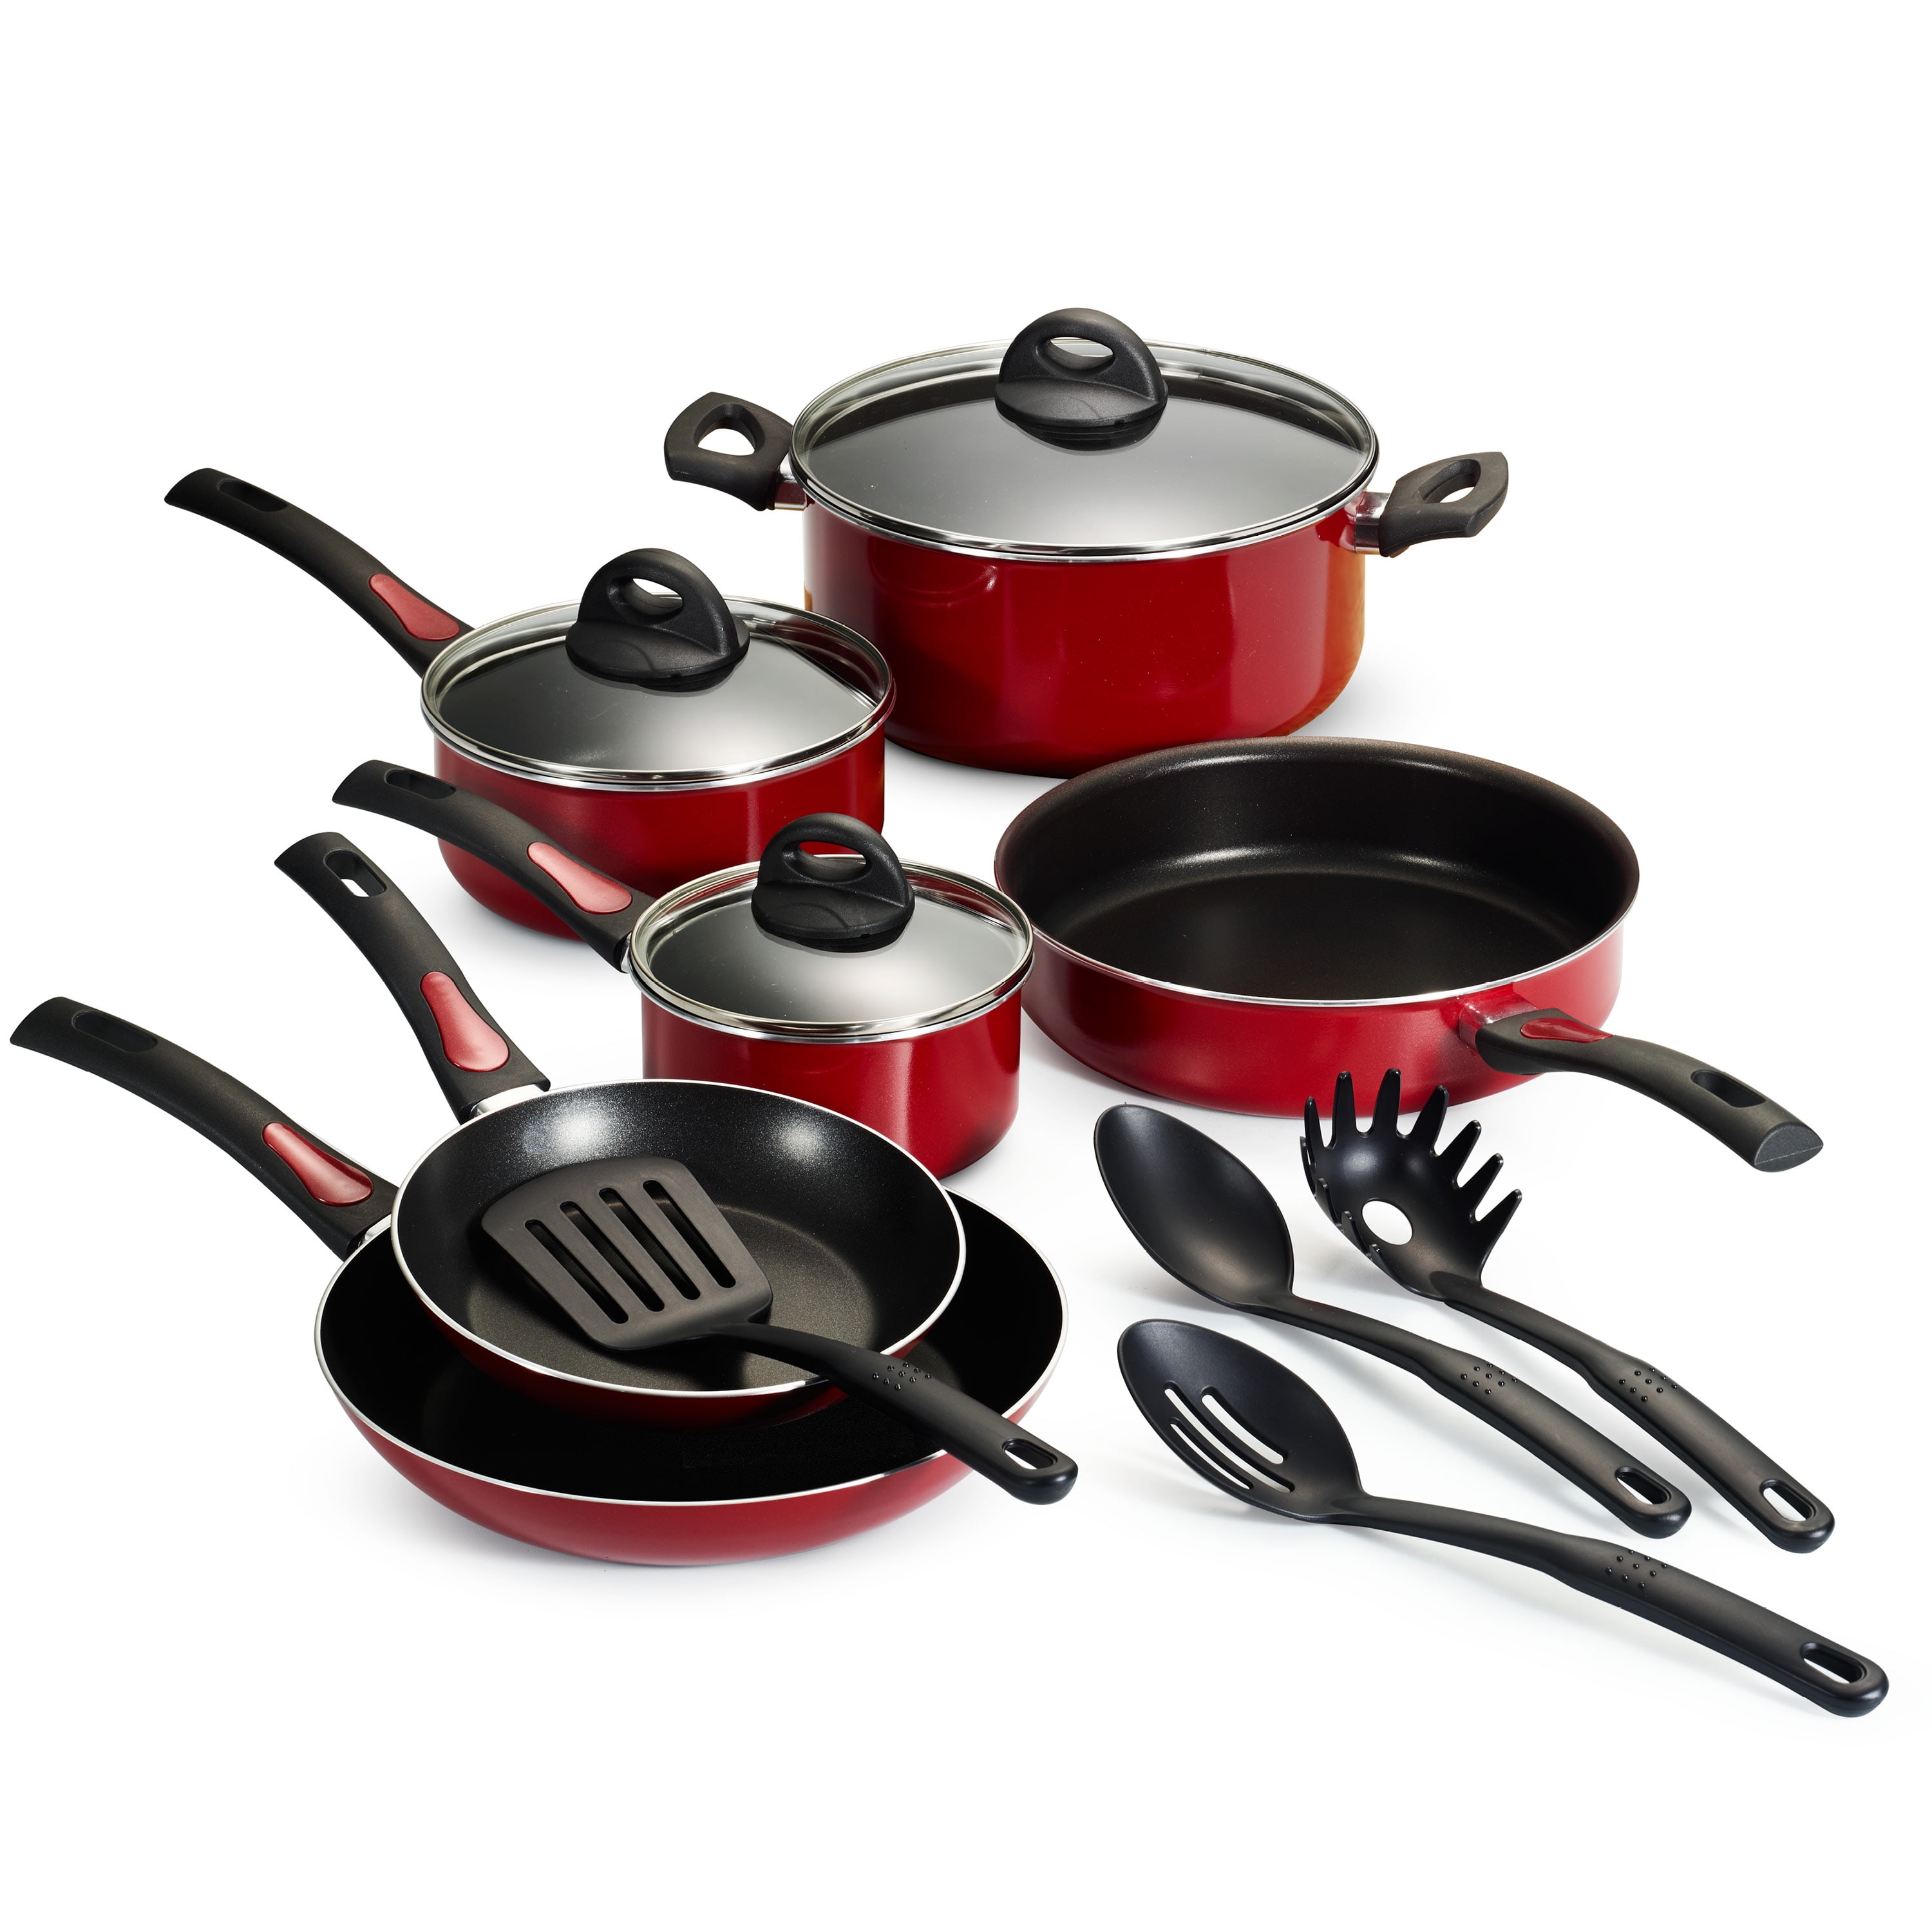 Tramontin New 9-Piece Simple Cooking Nonstick Cookware Set (Red)